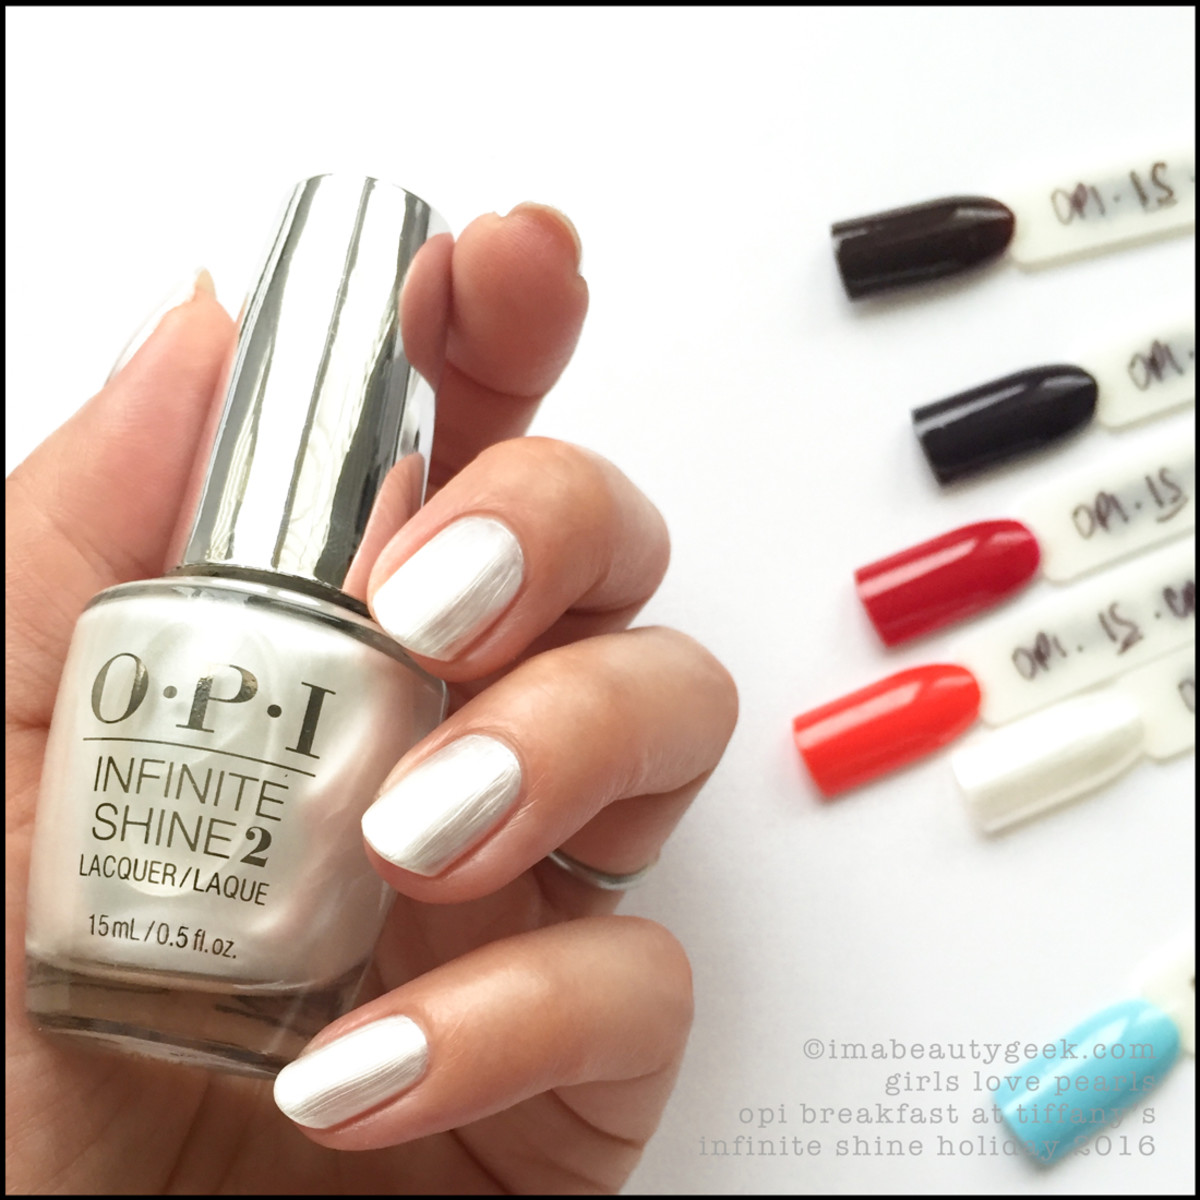 OPI Girls Love Pearls Infinite Shine_OPI Breakfast at Tiffanys Collection Swatches Review Holiday 2016